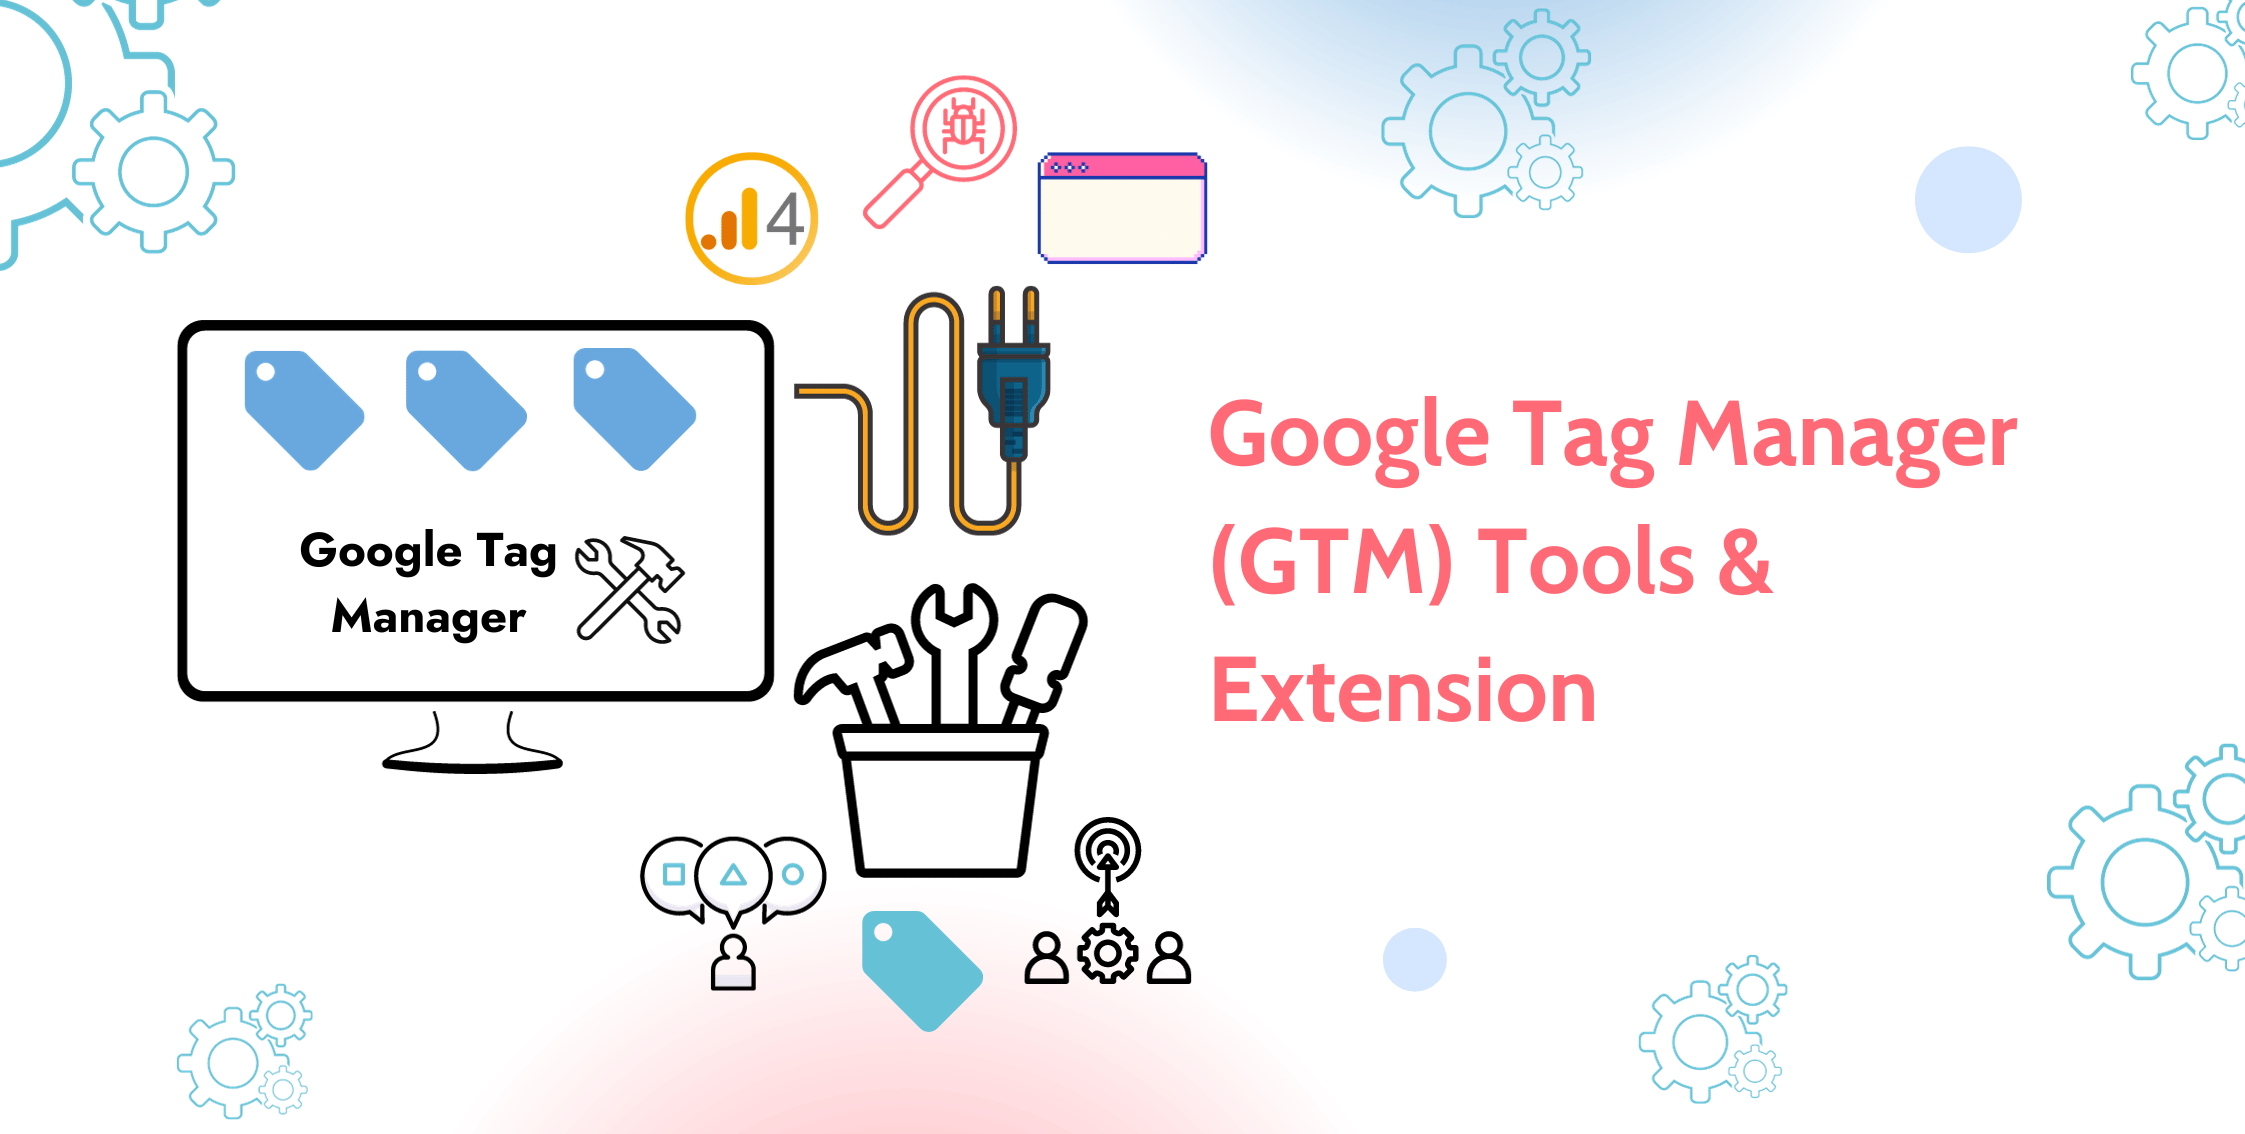 Top Google Tag Manager (GTM) Tools & Extensions